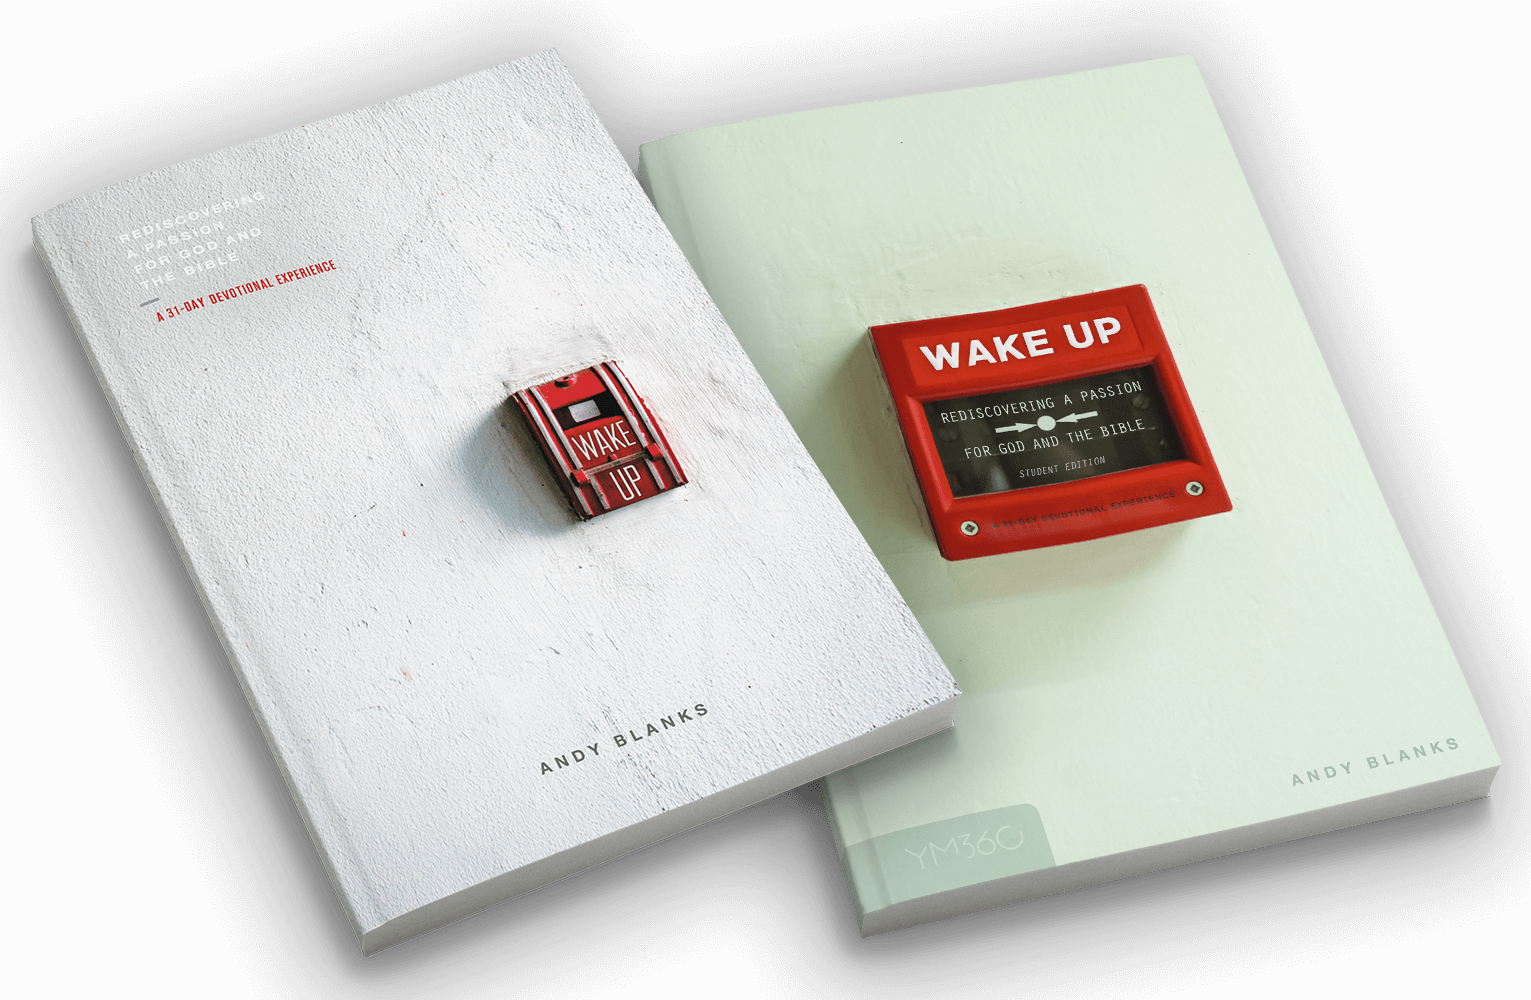 Wake Up: Rediscovering A Passion for God and the Bible Small Group Bundle